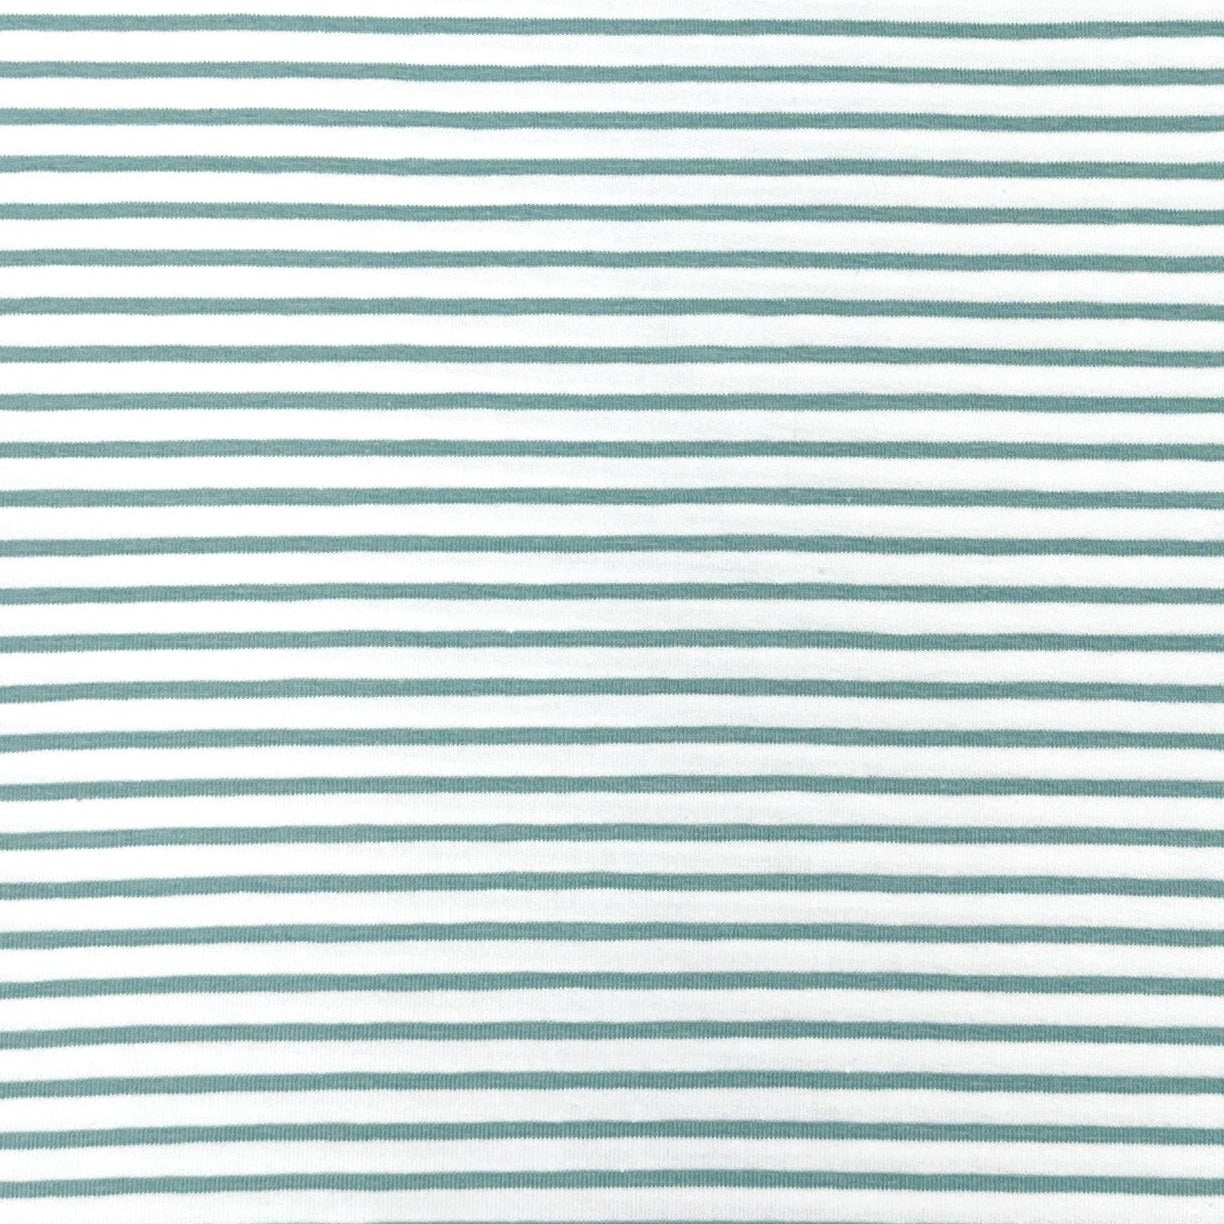 Lined water blue and white 5 mm - Lined jersey